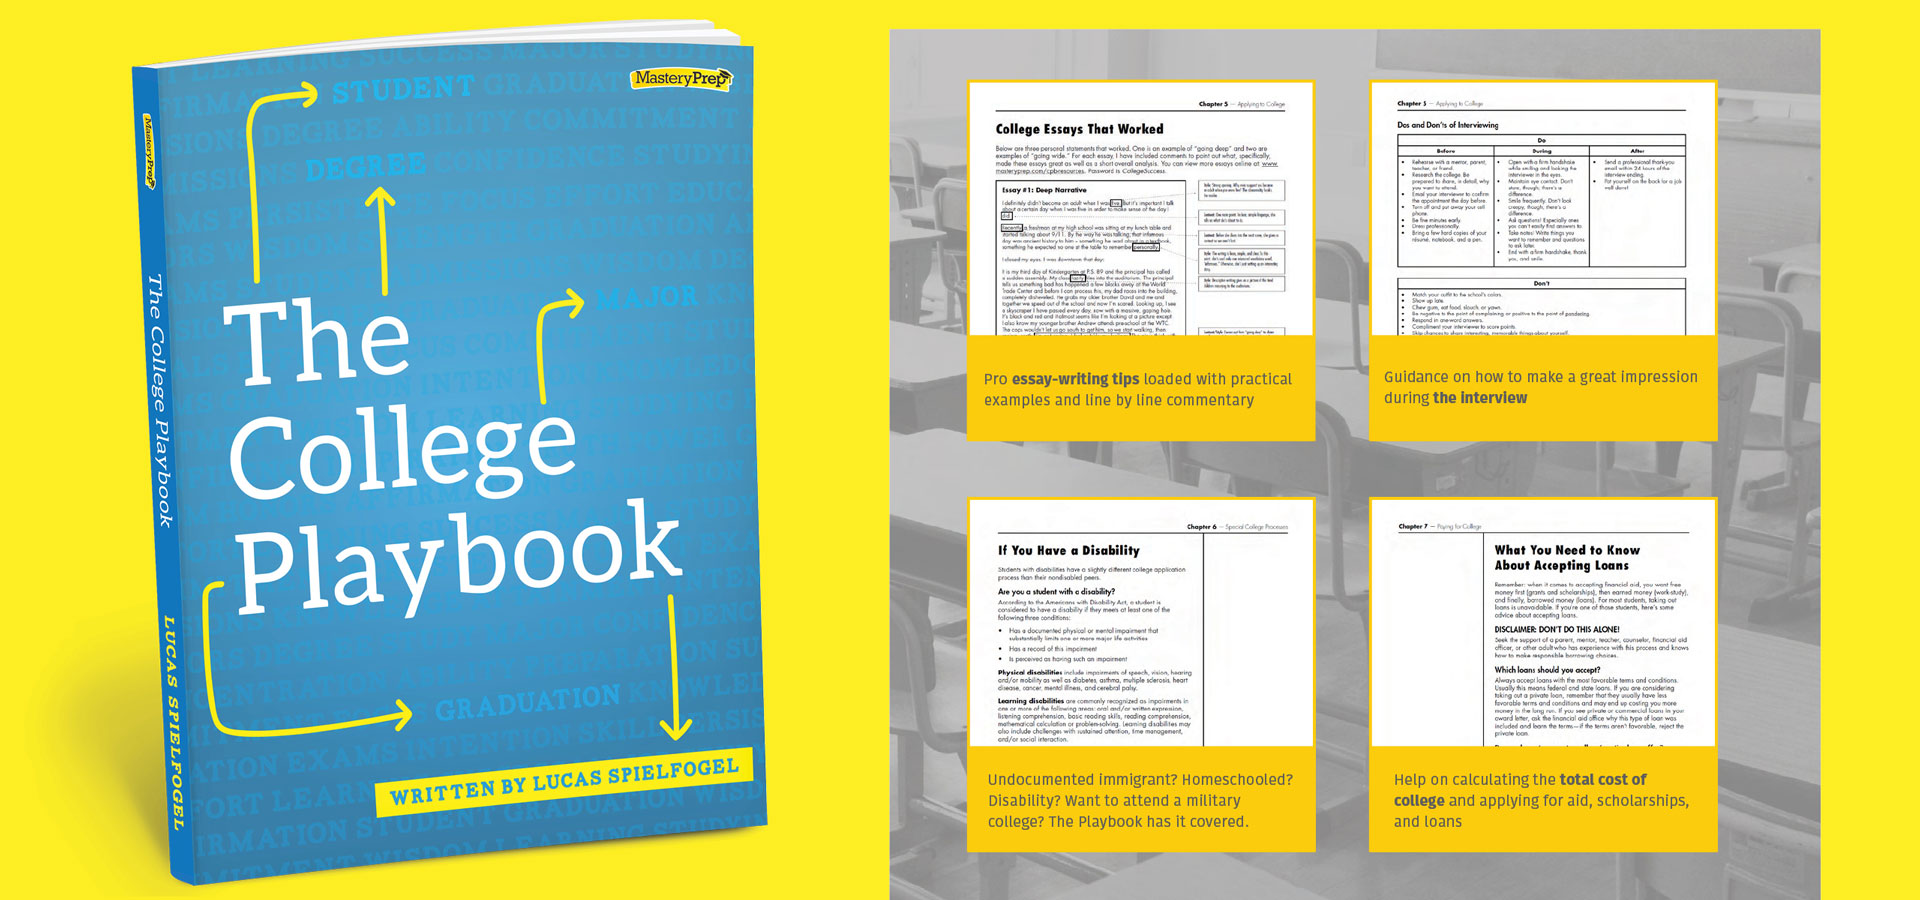 Screenshot of the book cover of The College Playbook and screenshots of some interior pages